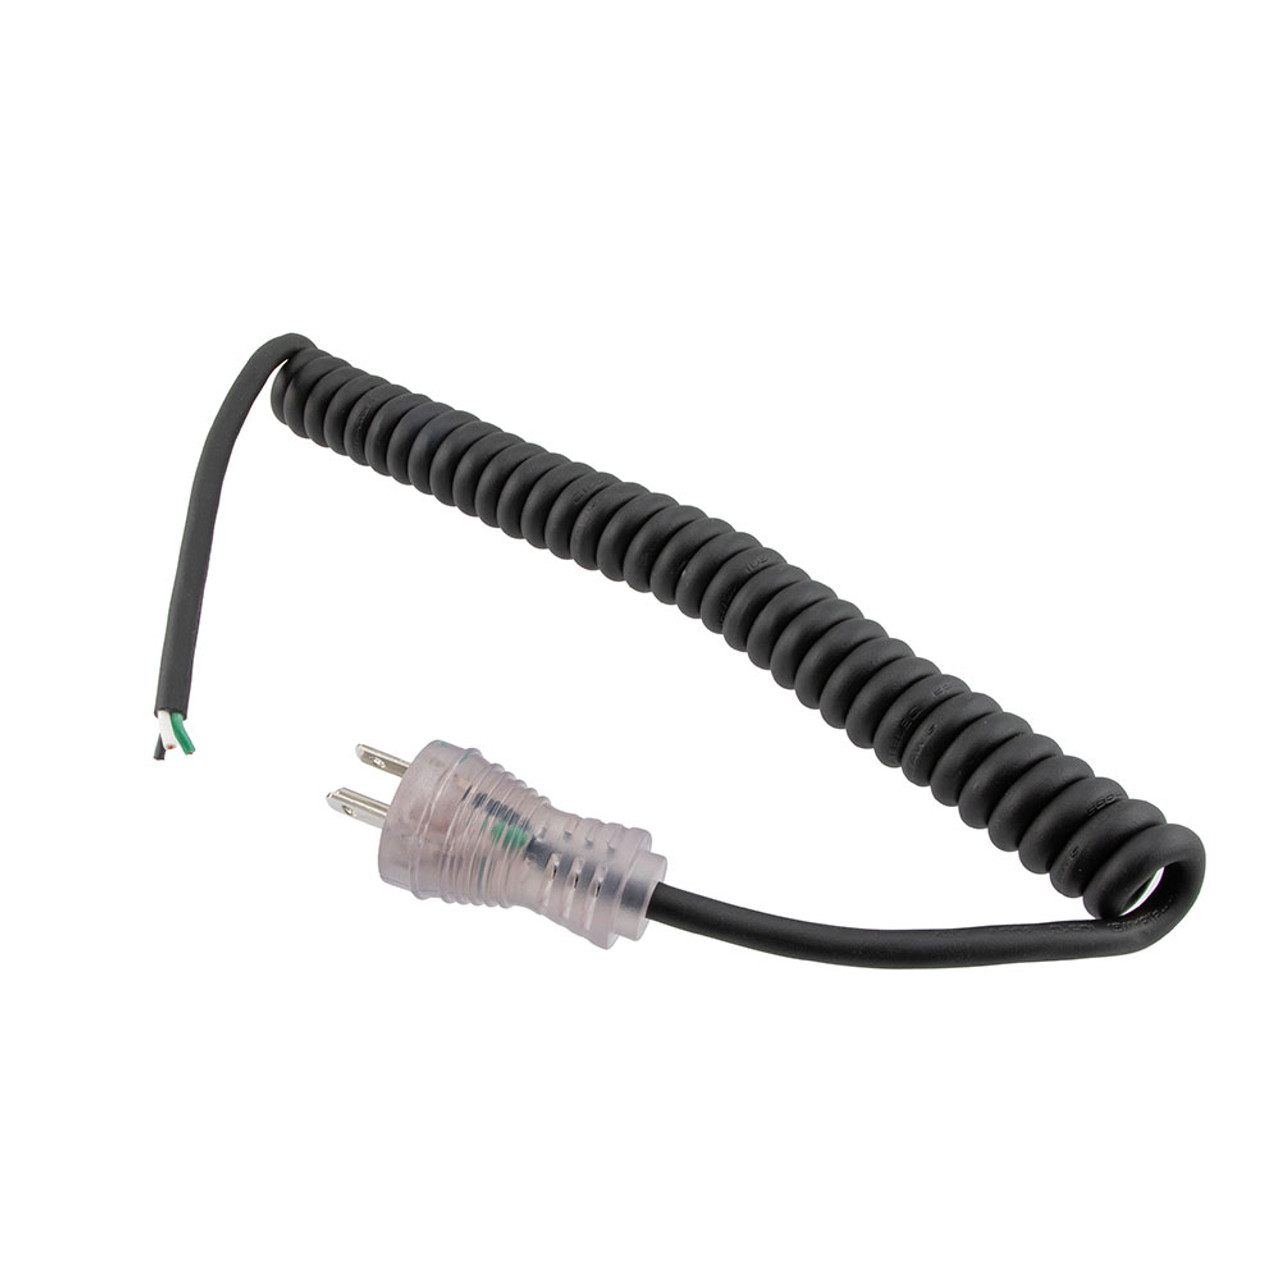 Hospital Grade NEMA 5-15 With LED to Open Coiled Power Cord 18 AWG TPE Jacket, 2 Foot Compressed Length